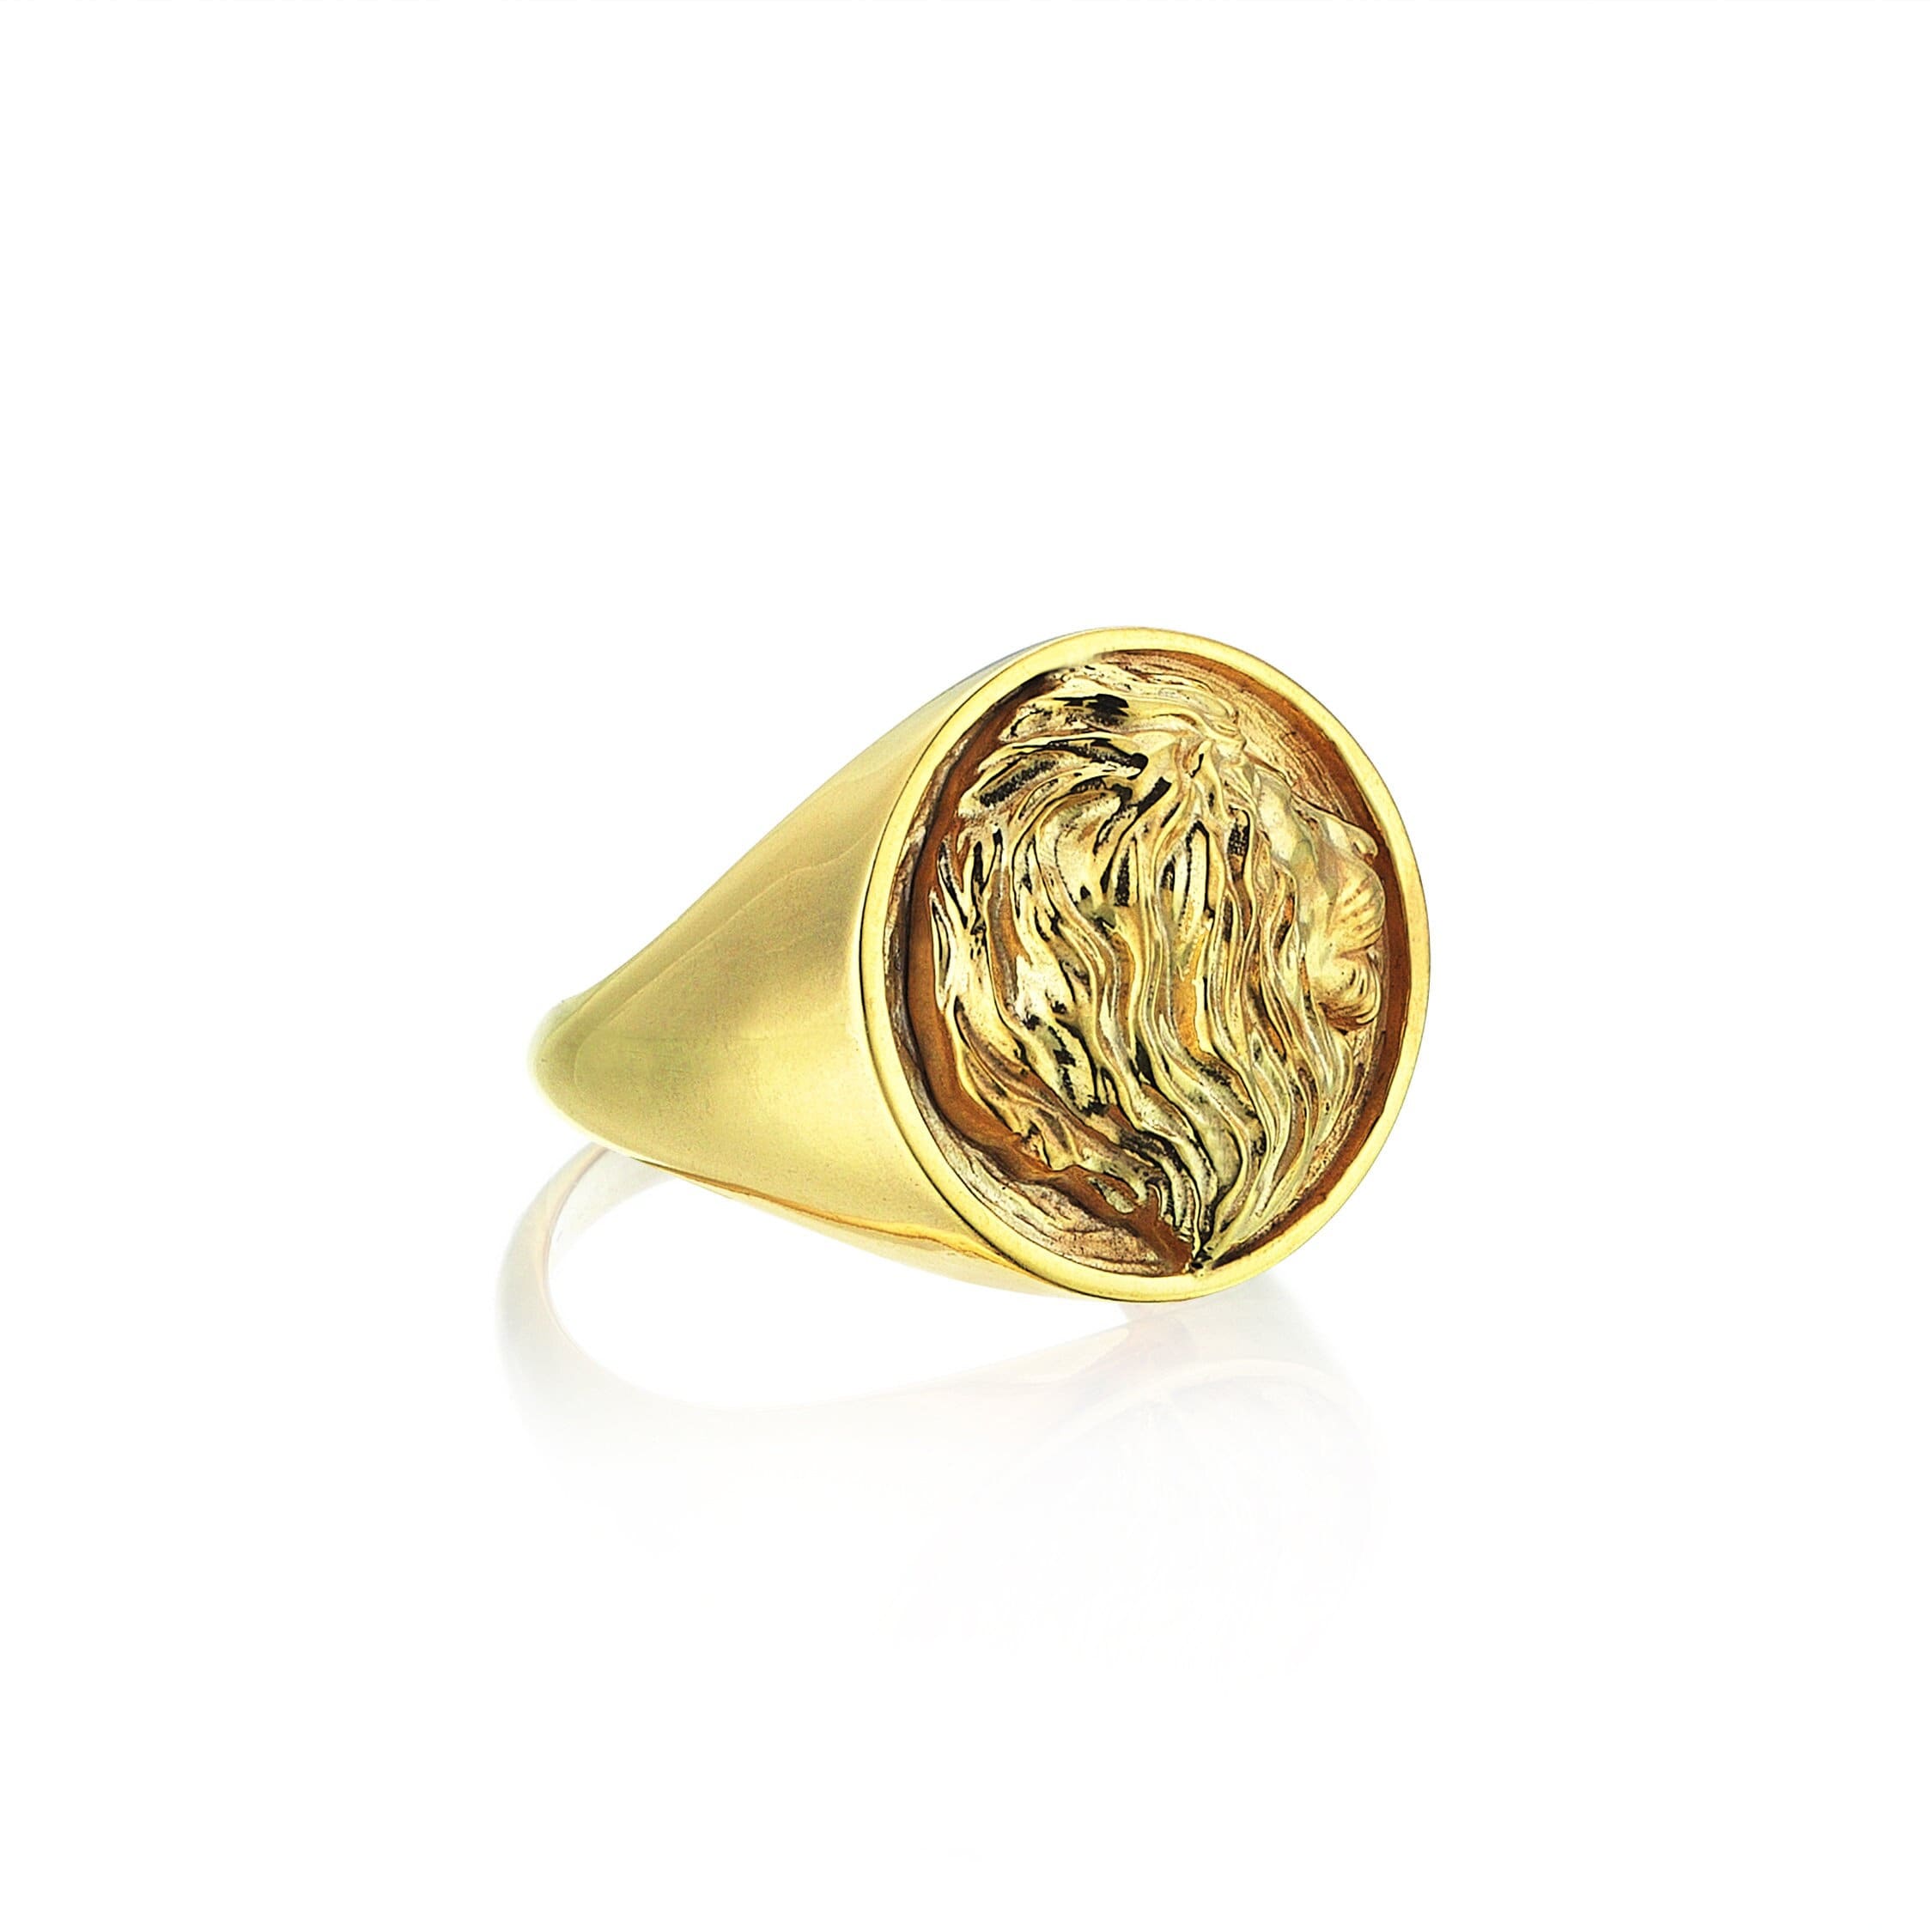 Petrvs Lion Signet Ring in Sterling Silver with 18K Yellow Gold, 19mm |  David Yurman